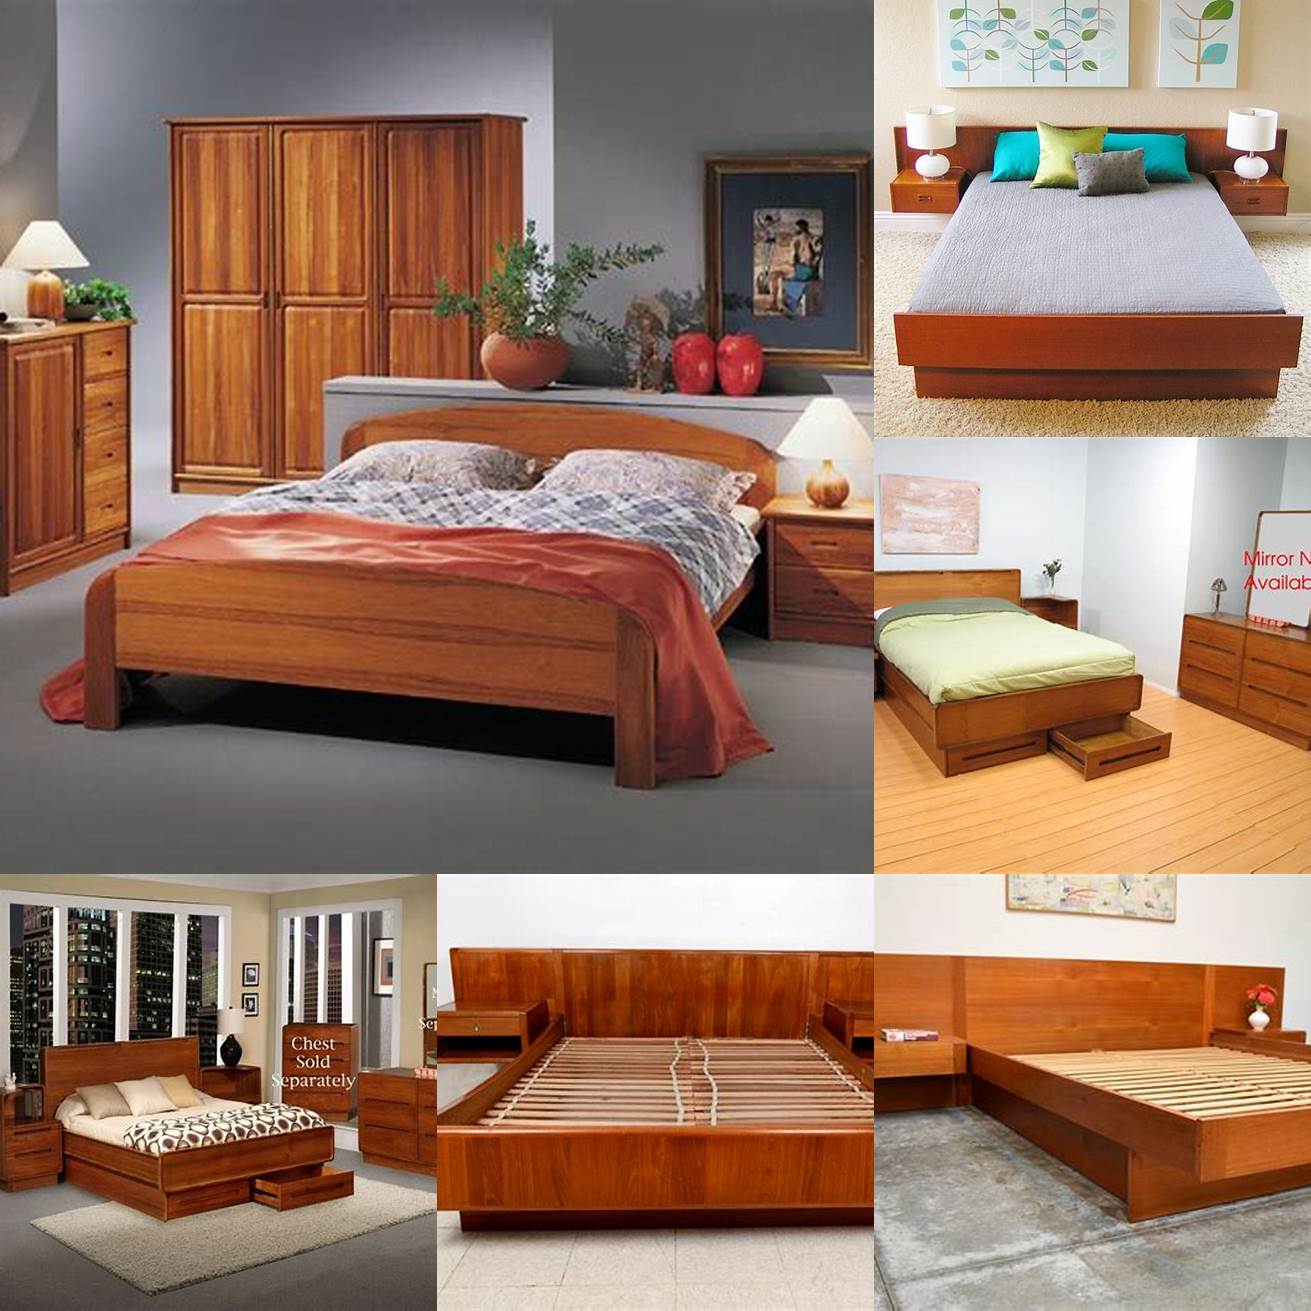 A picture of teak bedroom furniture